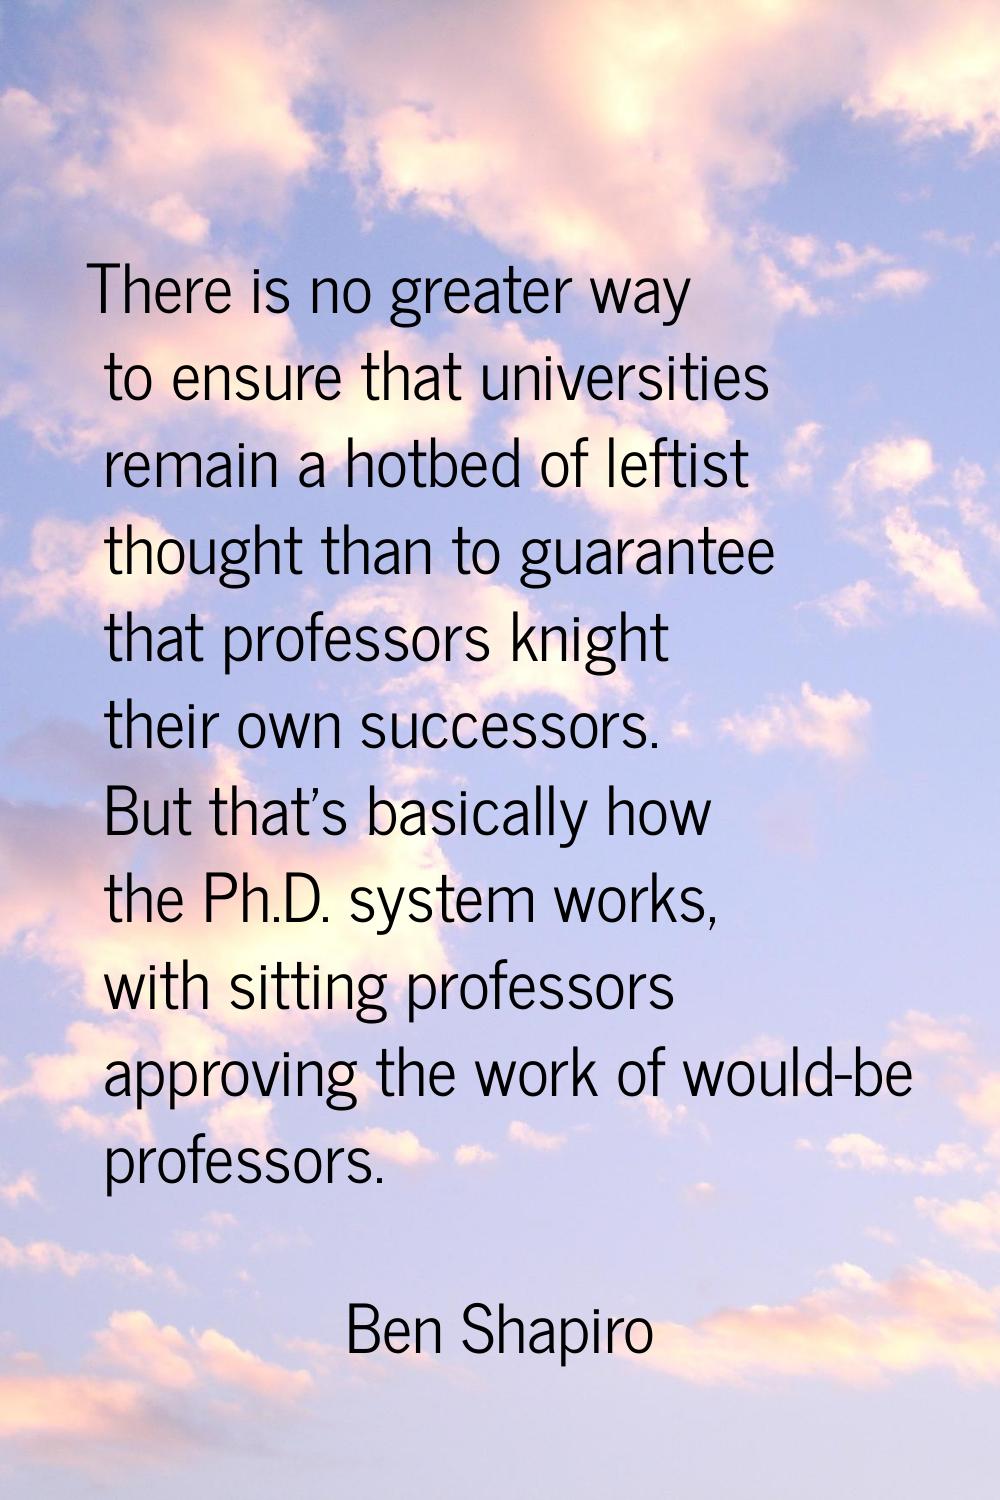 There is no greater way to ensure that universities remain a hotbed of leftist thought than to guar